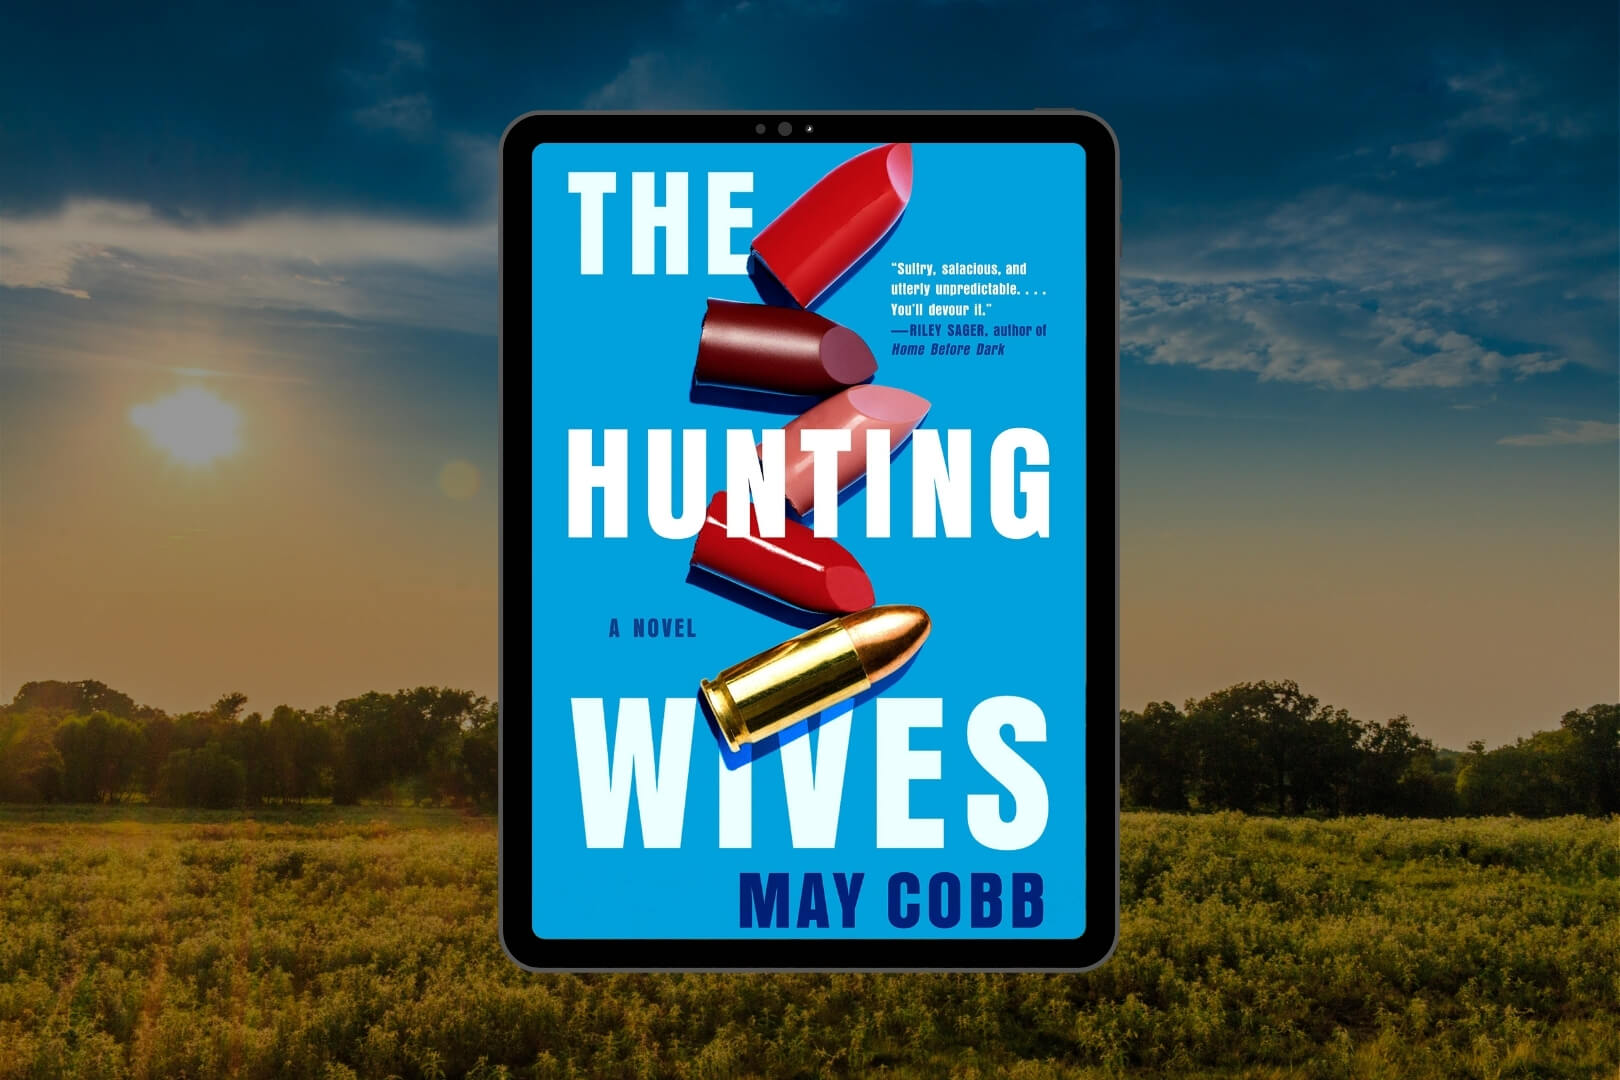 Review: The Hunting Wives by May Cobb